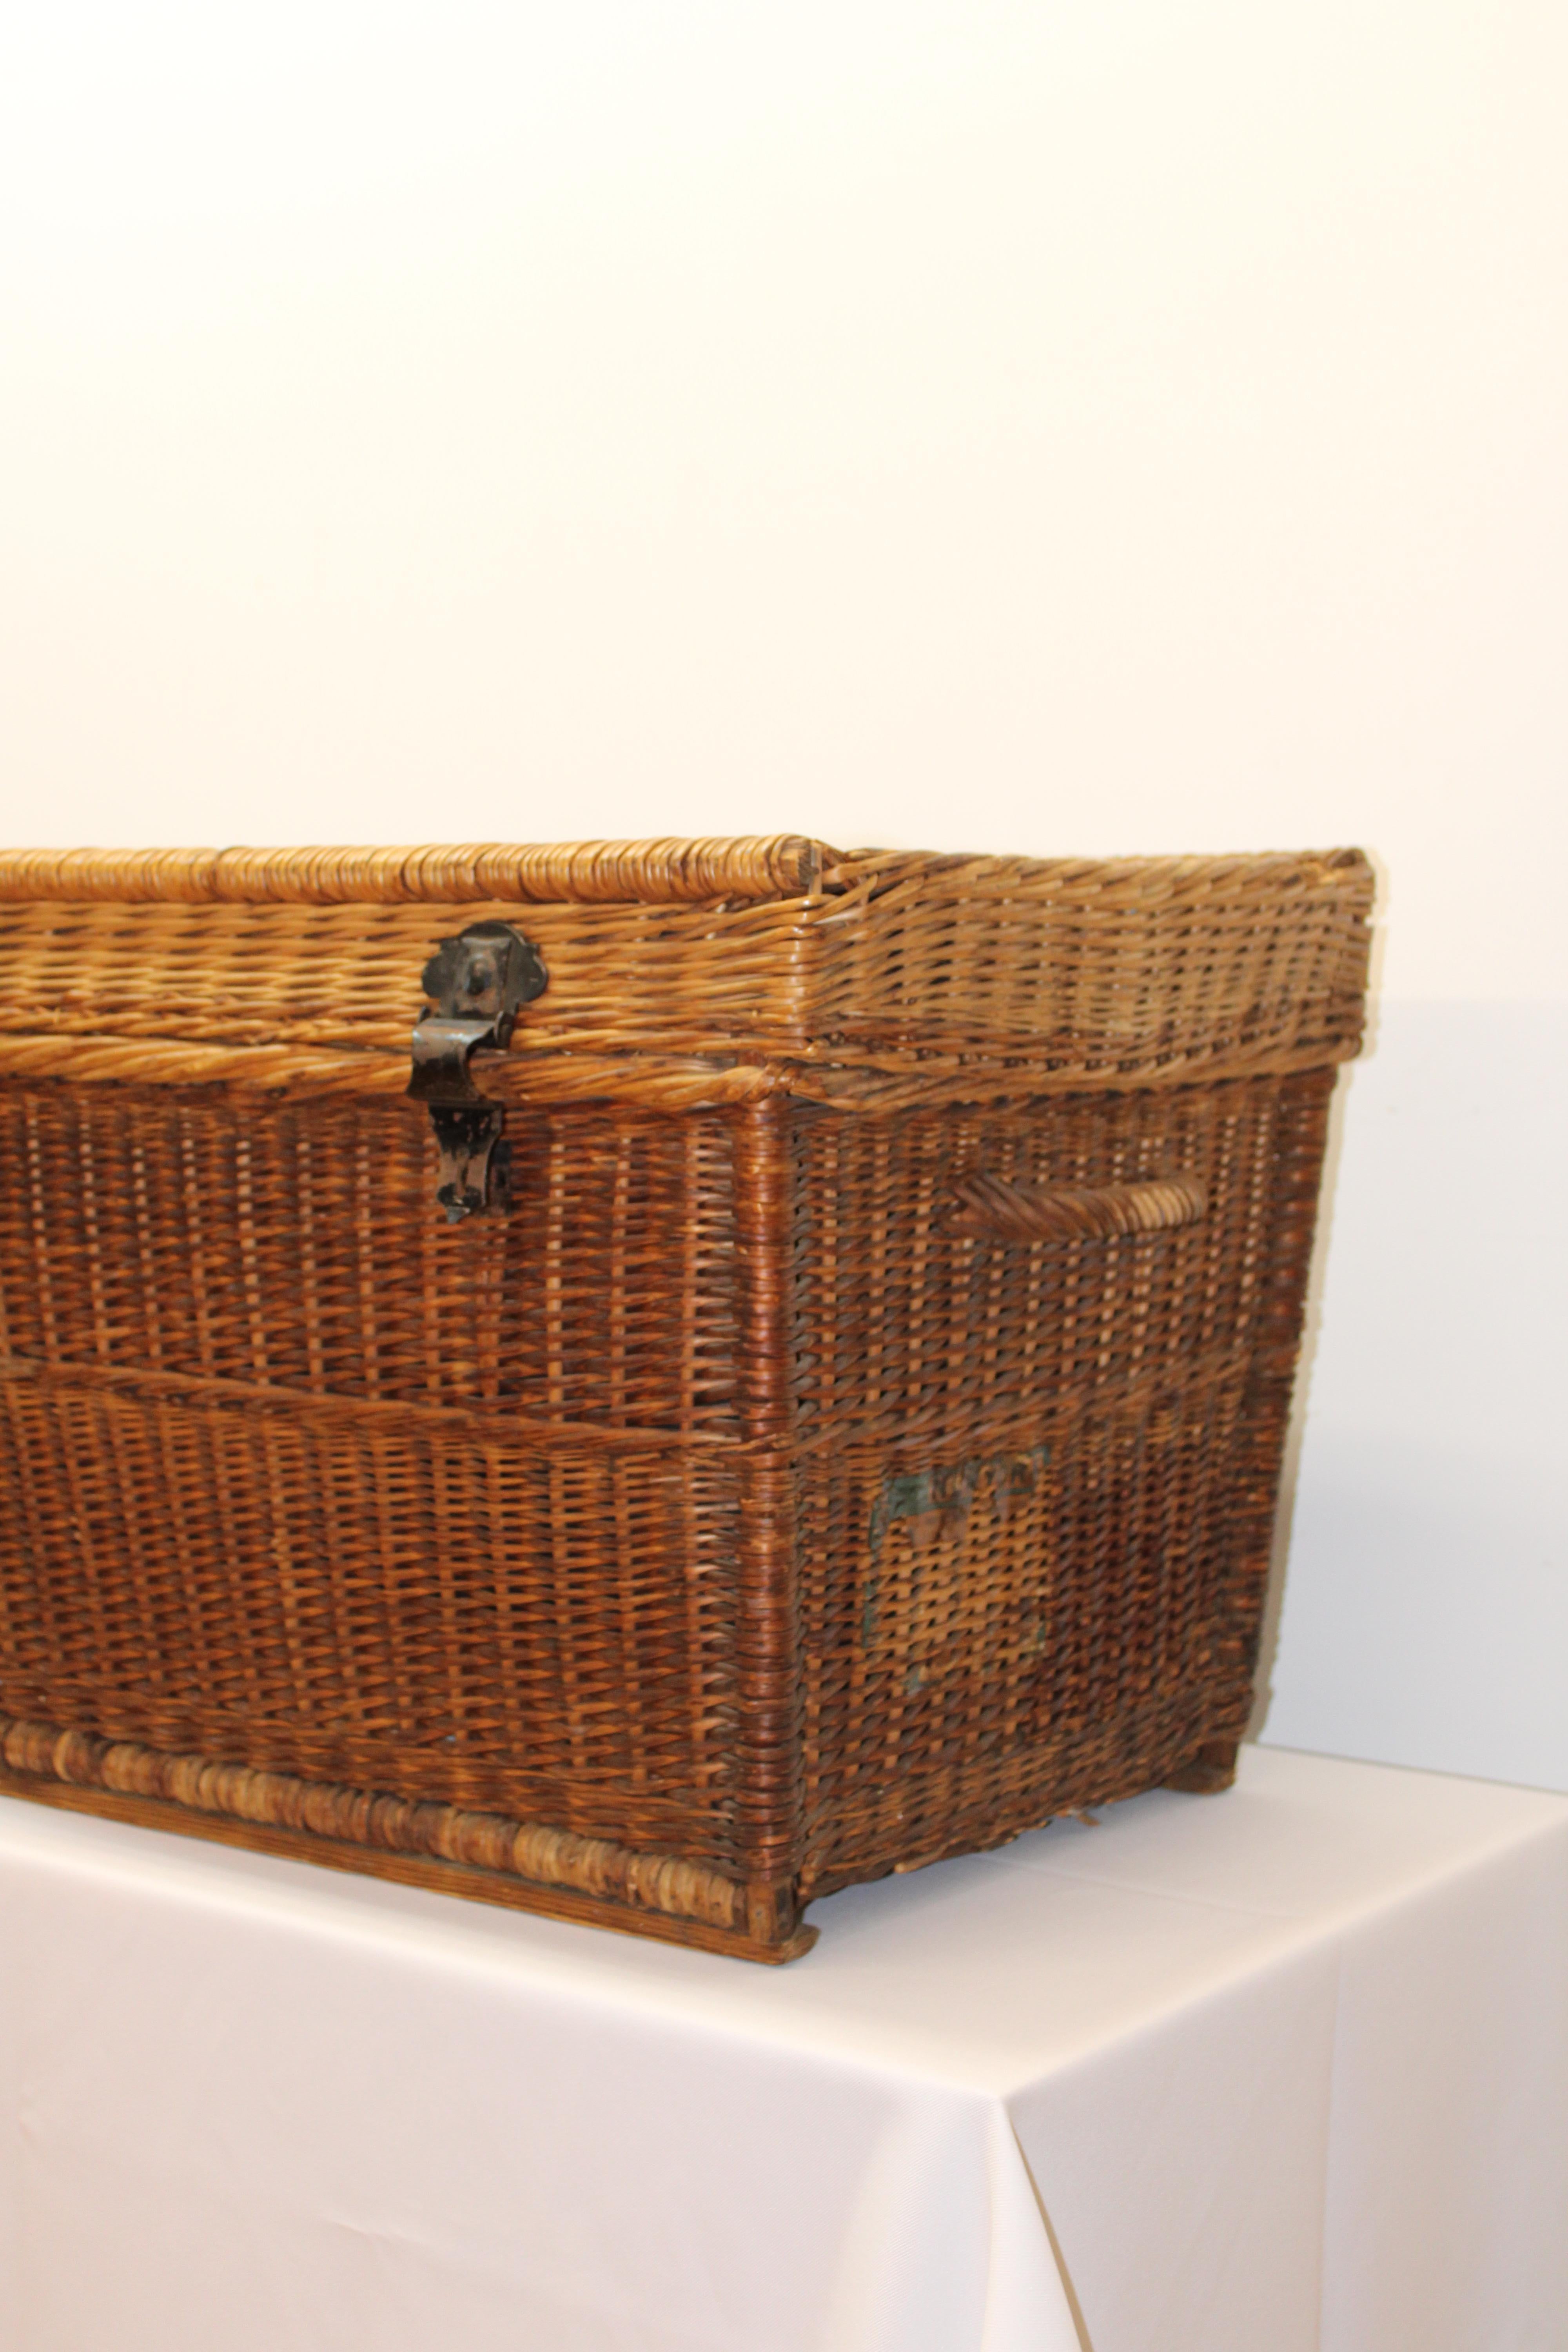 Woven Traveling Basket / Picnic Basket In Good Condition In San Francisco, CA